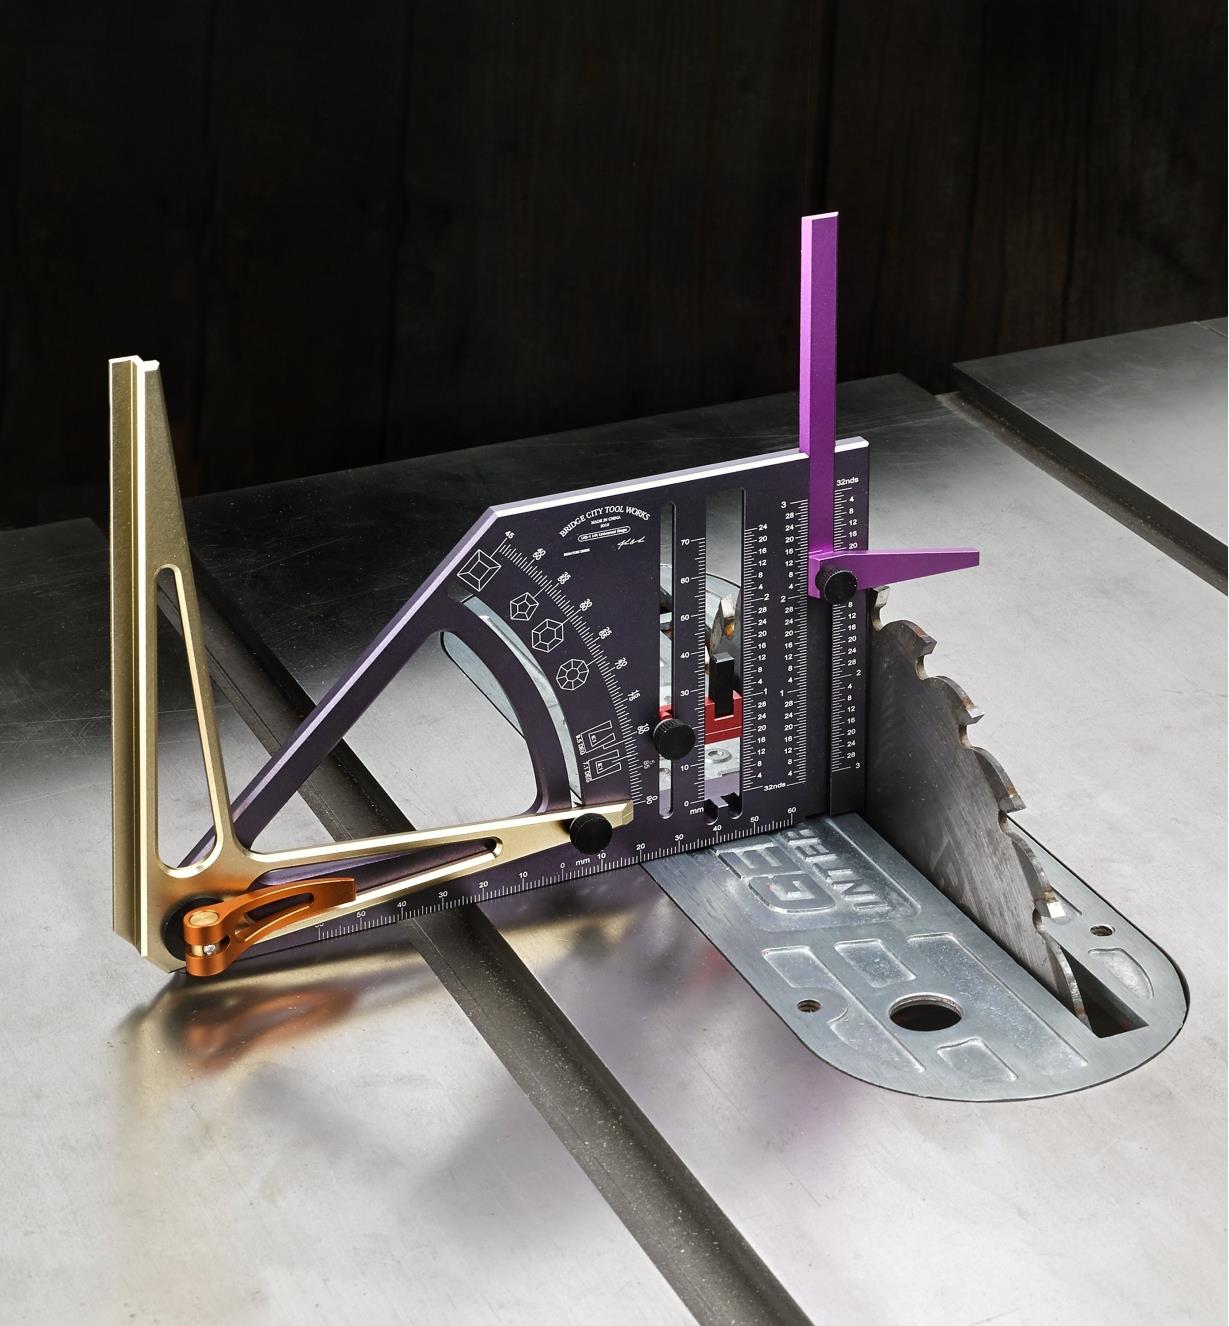 A Bridge City right-hand universal gauge being used to check the height of a table-saw blade